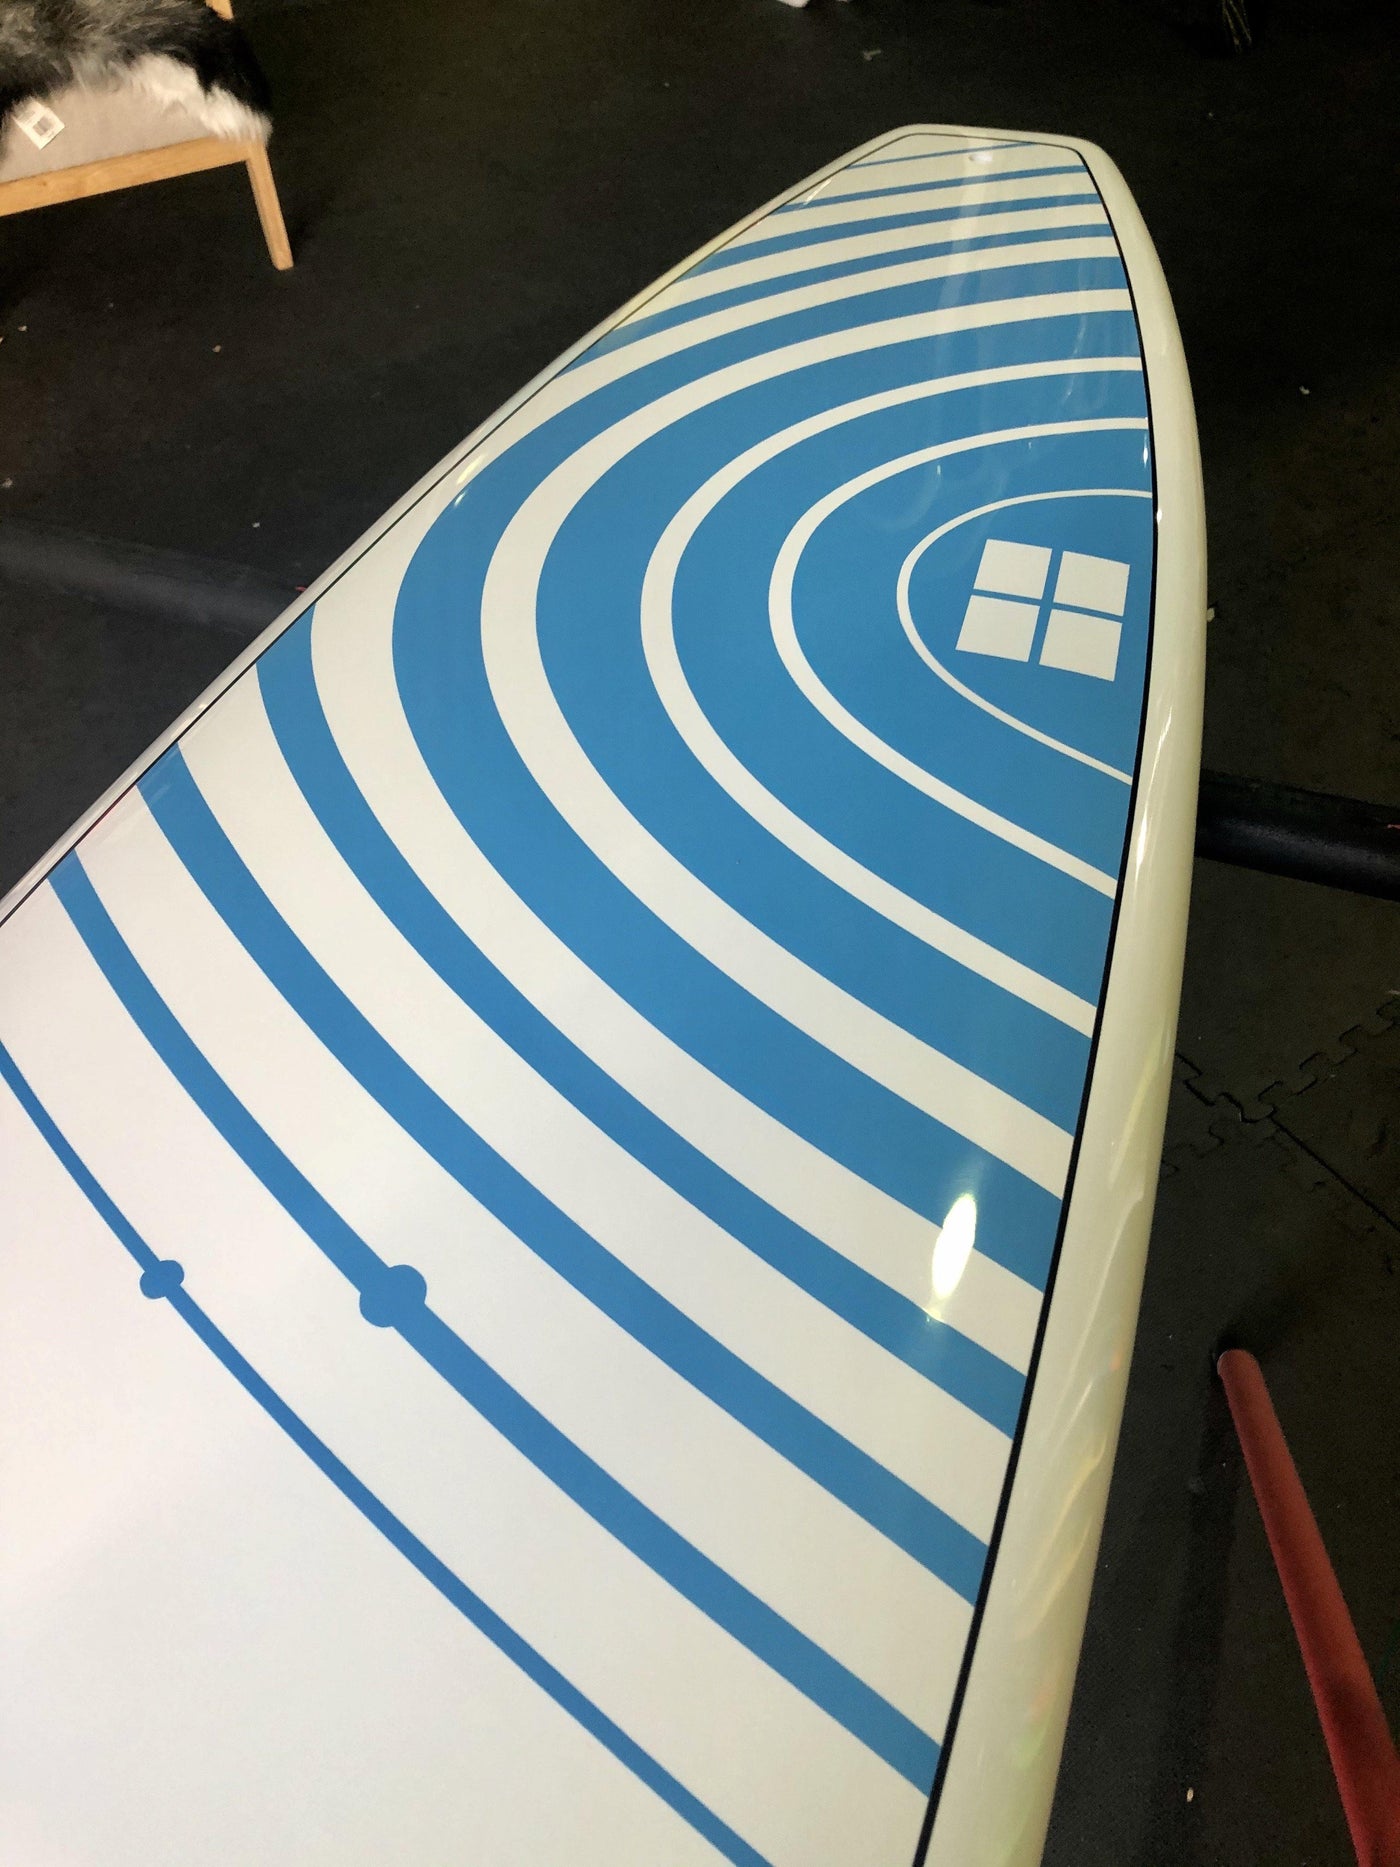 SURFBOARD 6'3" X 18"13/16 BLUE AND WHITE DESIGN - Alleydesigns  Pty Ltd                                             ABN: 44165571264